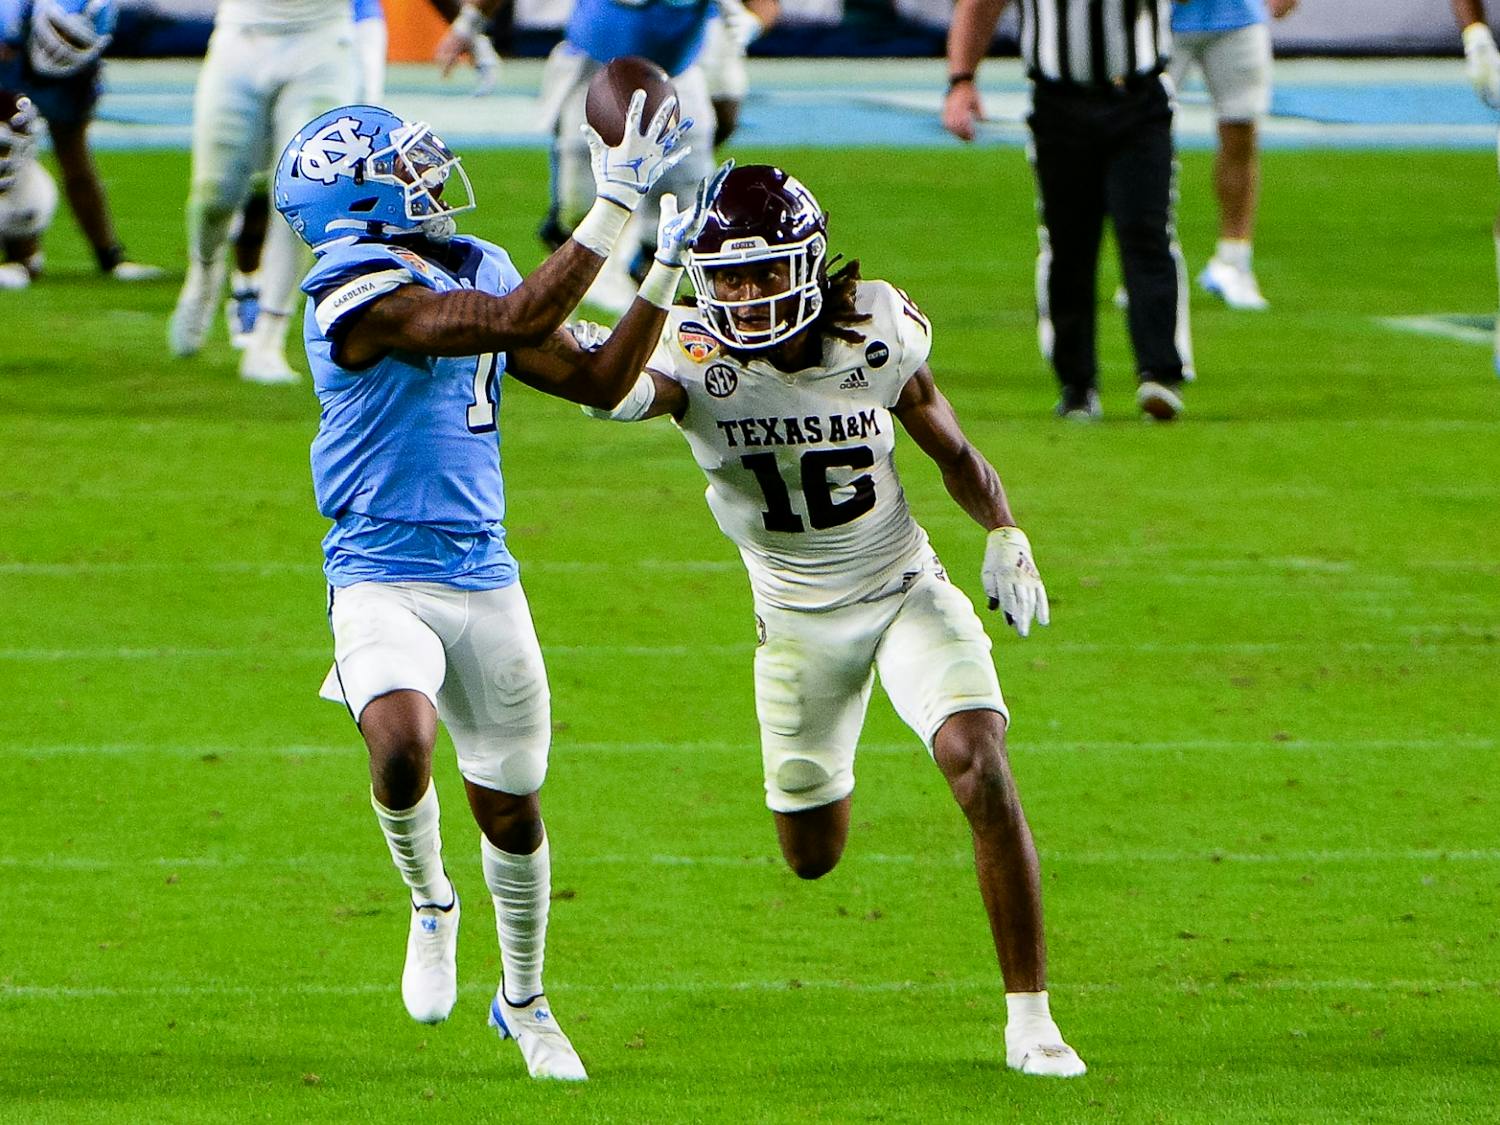 UNC's redshirt first year wide receiver Khafre Brown (1) attempts a catch during the Capital One Orange Bowl against Texas A&M in Hard Rock Stadium on Saturday, Jan. 2, 2021. Texas A&M beat UNC 41-27.